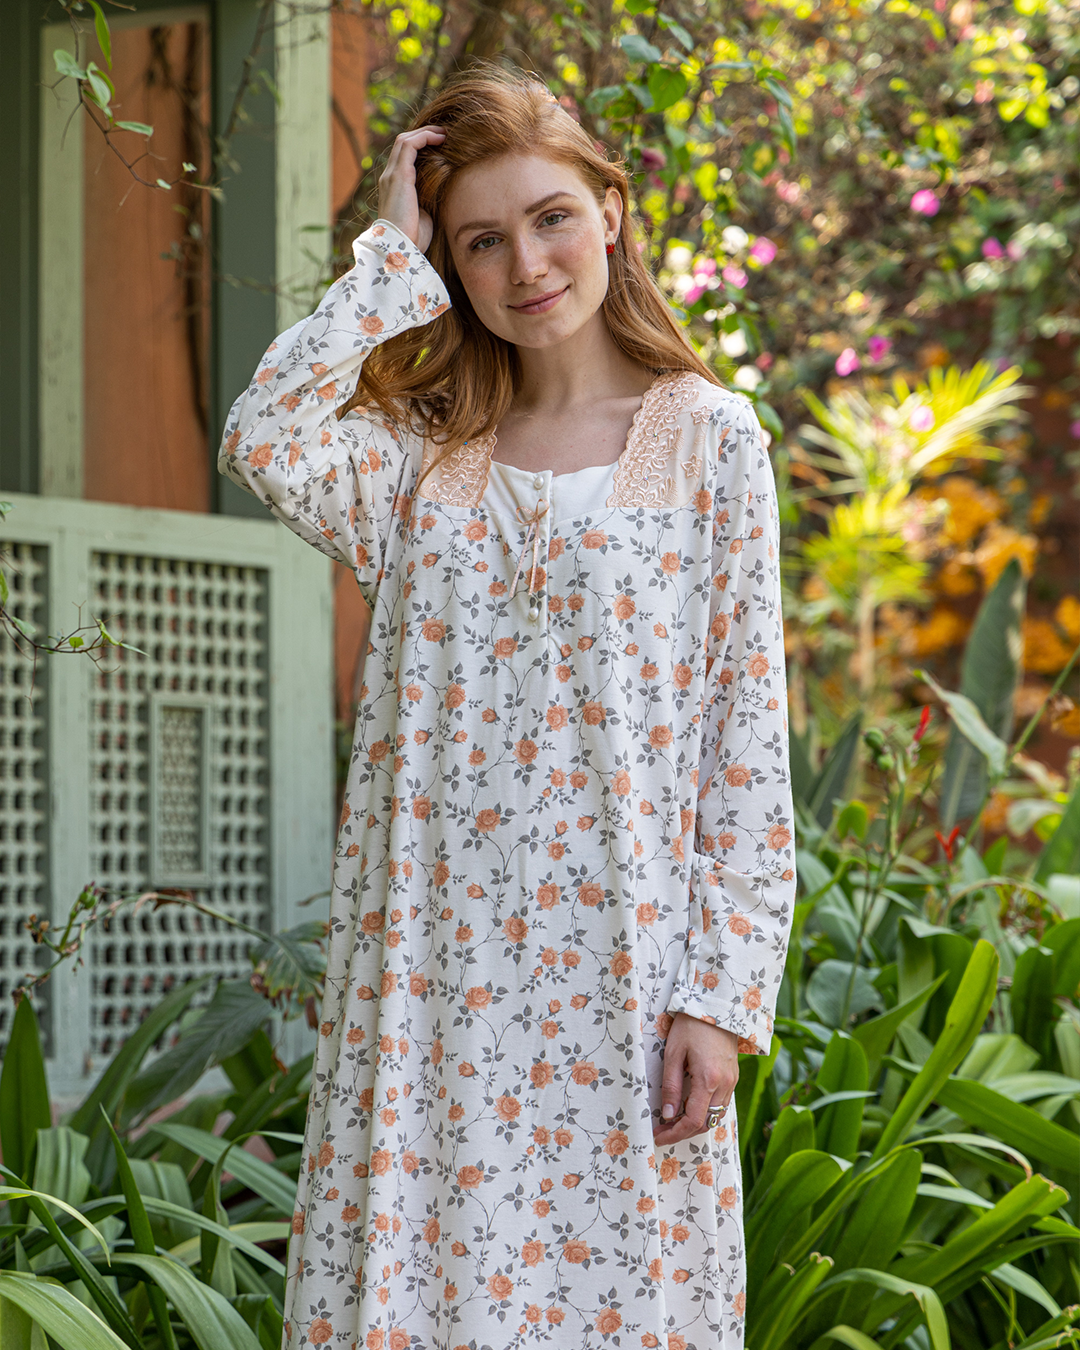 Women's nightshirt, half of its trip, lace and roses